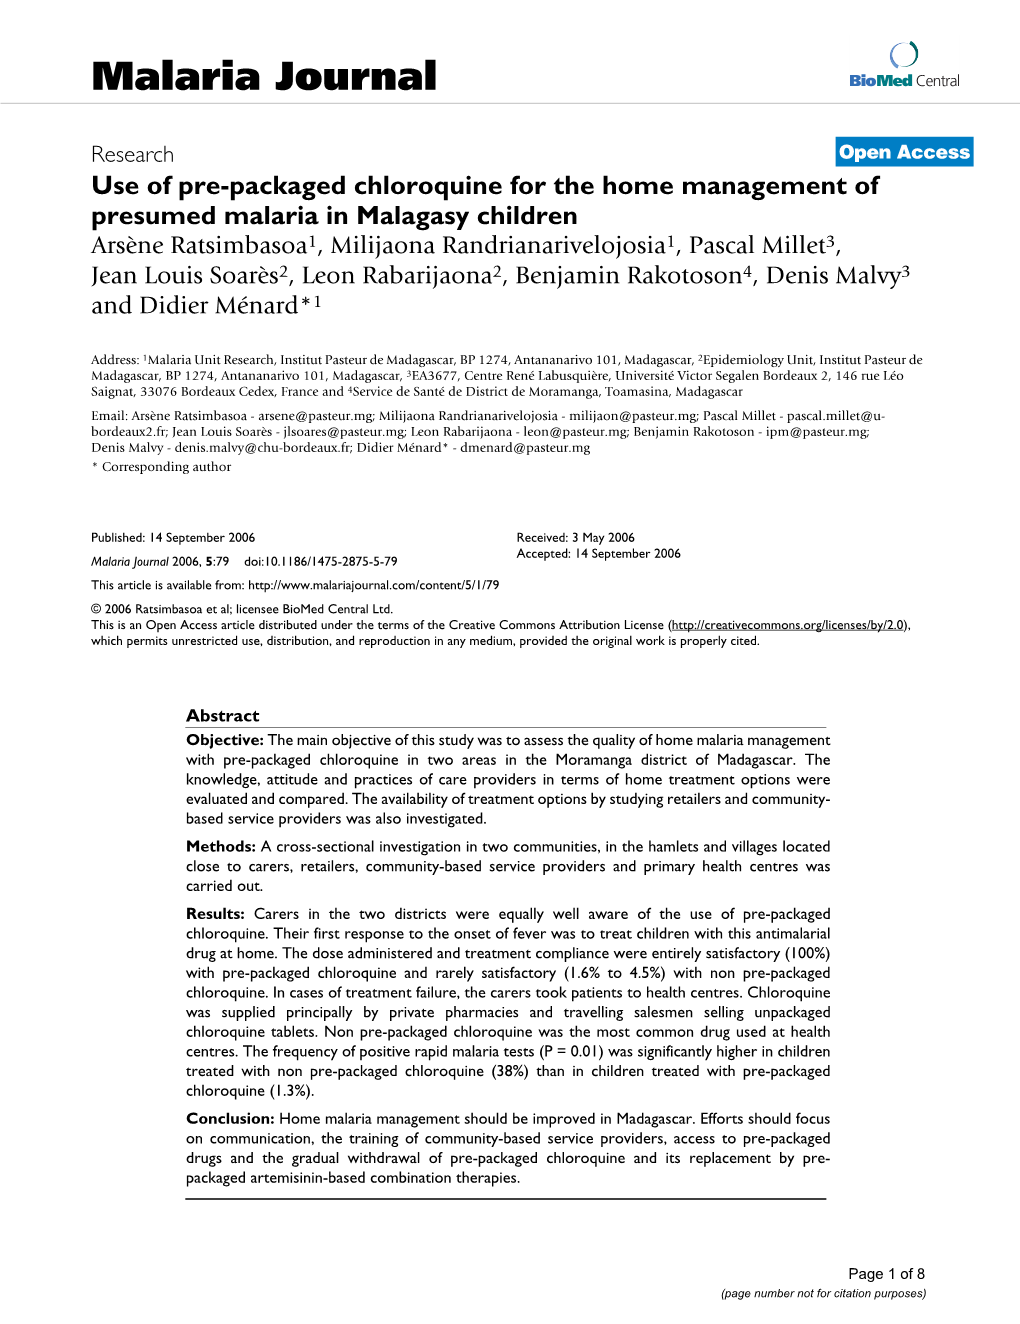 Use of Pre-Packaged Chloroquine for the Home Management Of